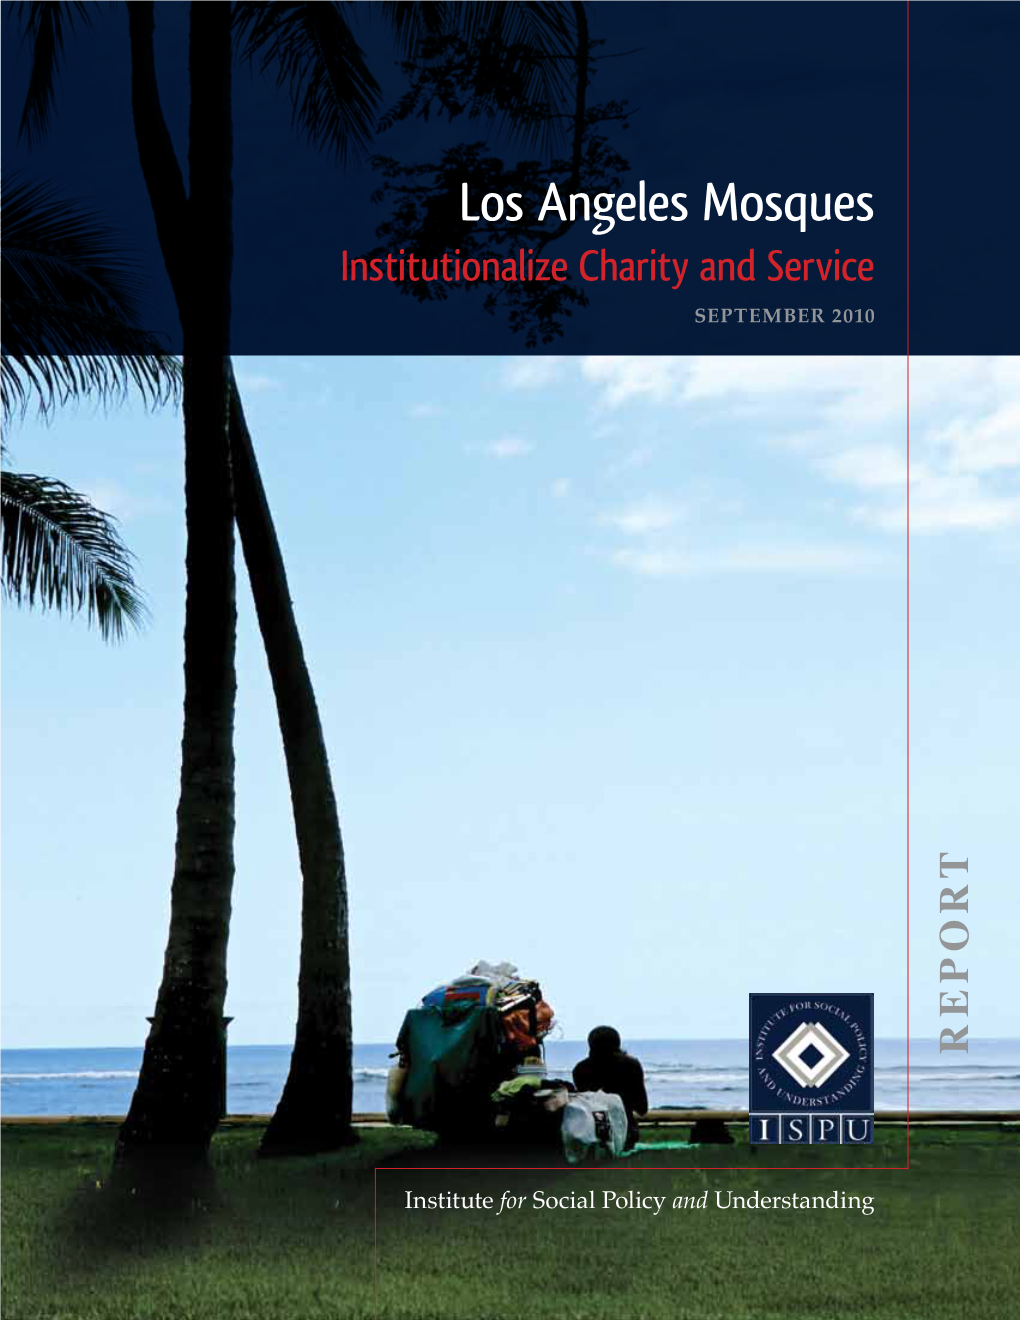 Los Angeles Mosques Institutionalize Charity and Service SEPTEMBER 2010 REPORT